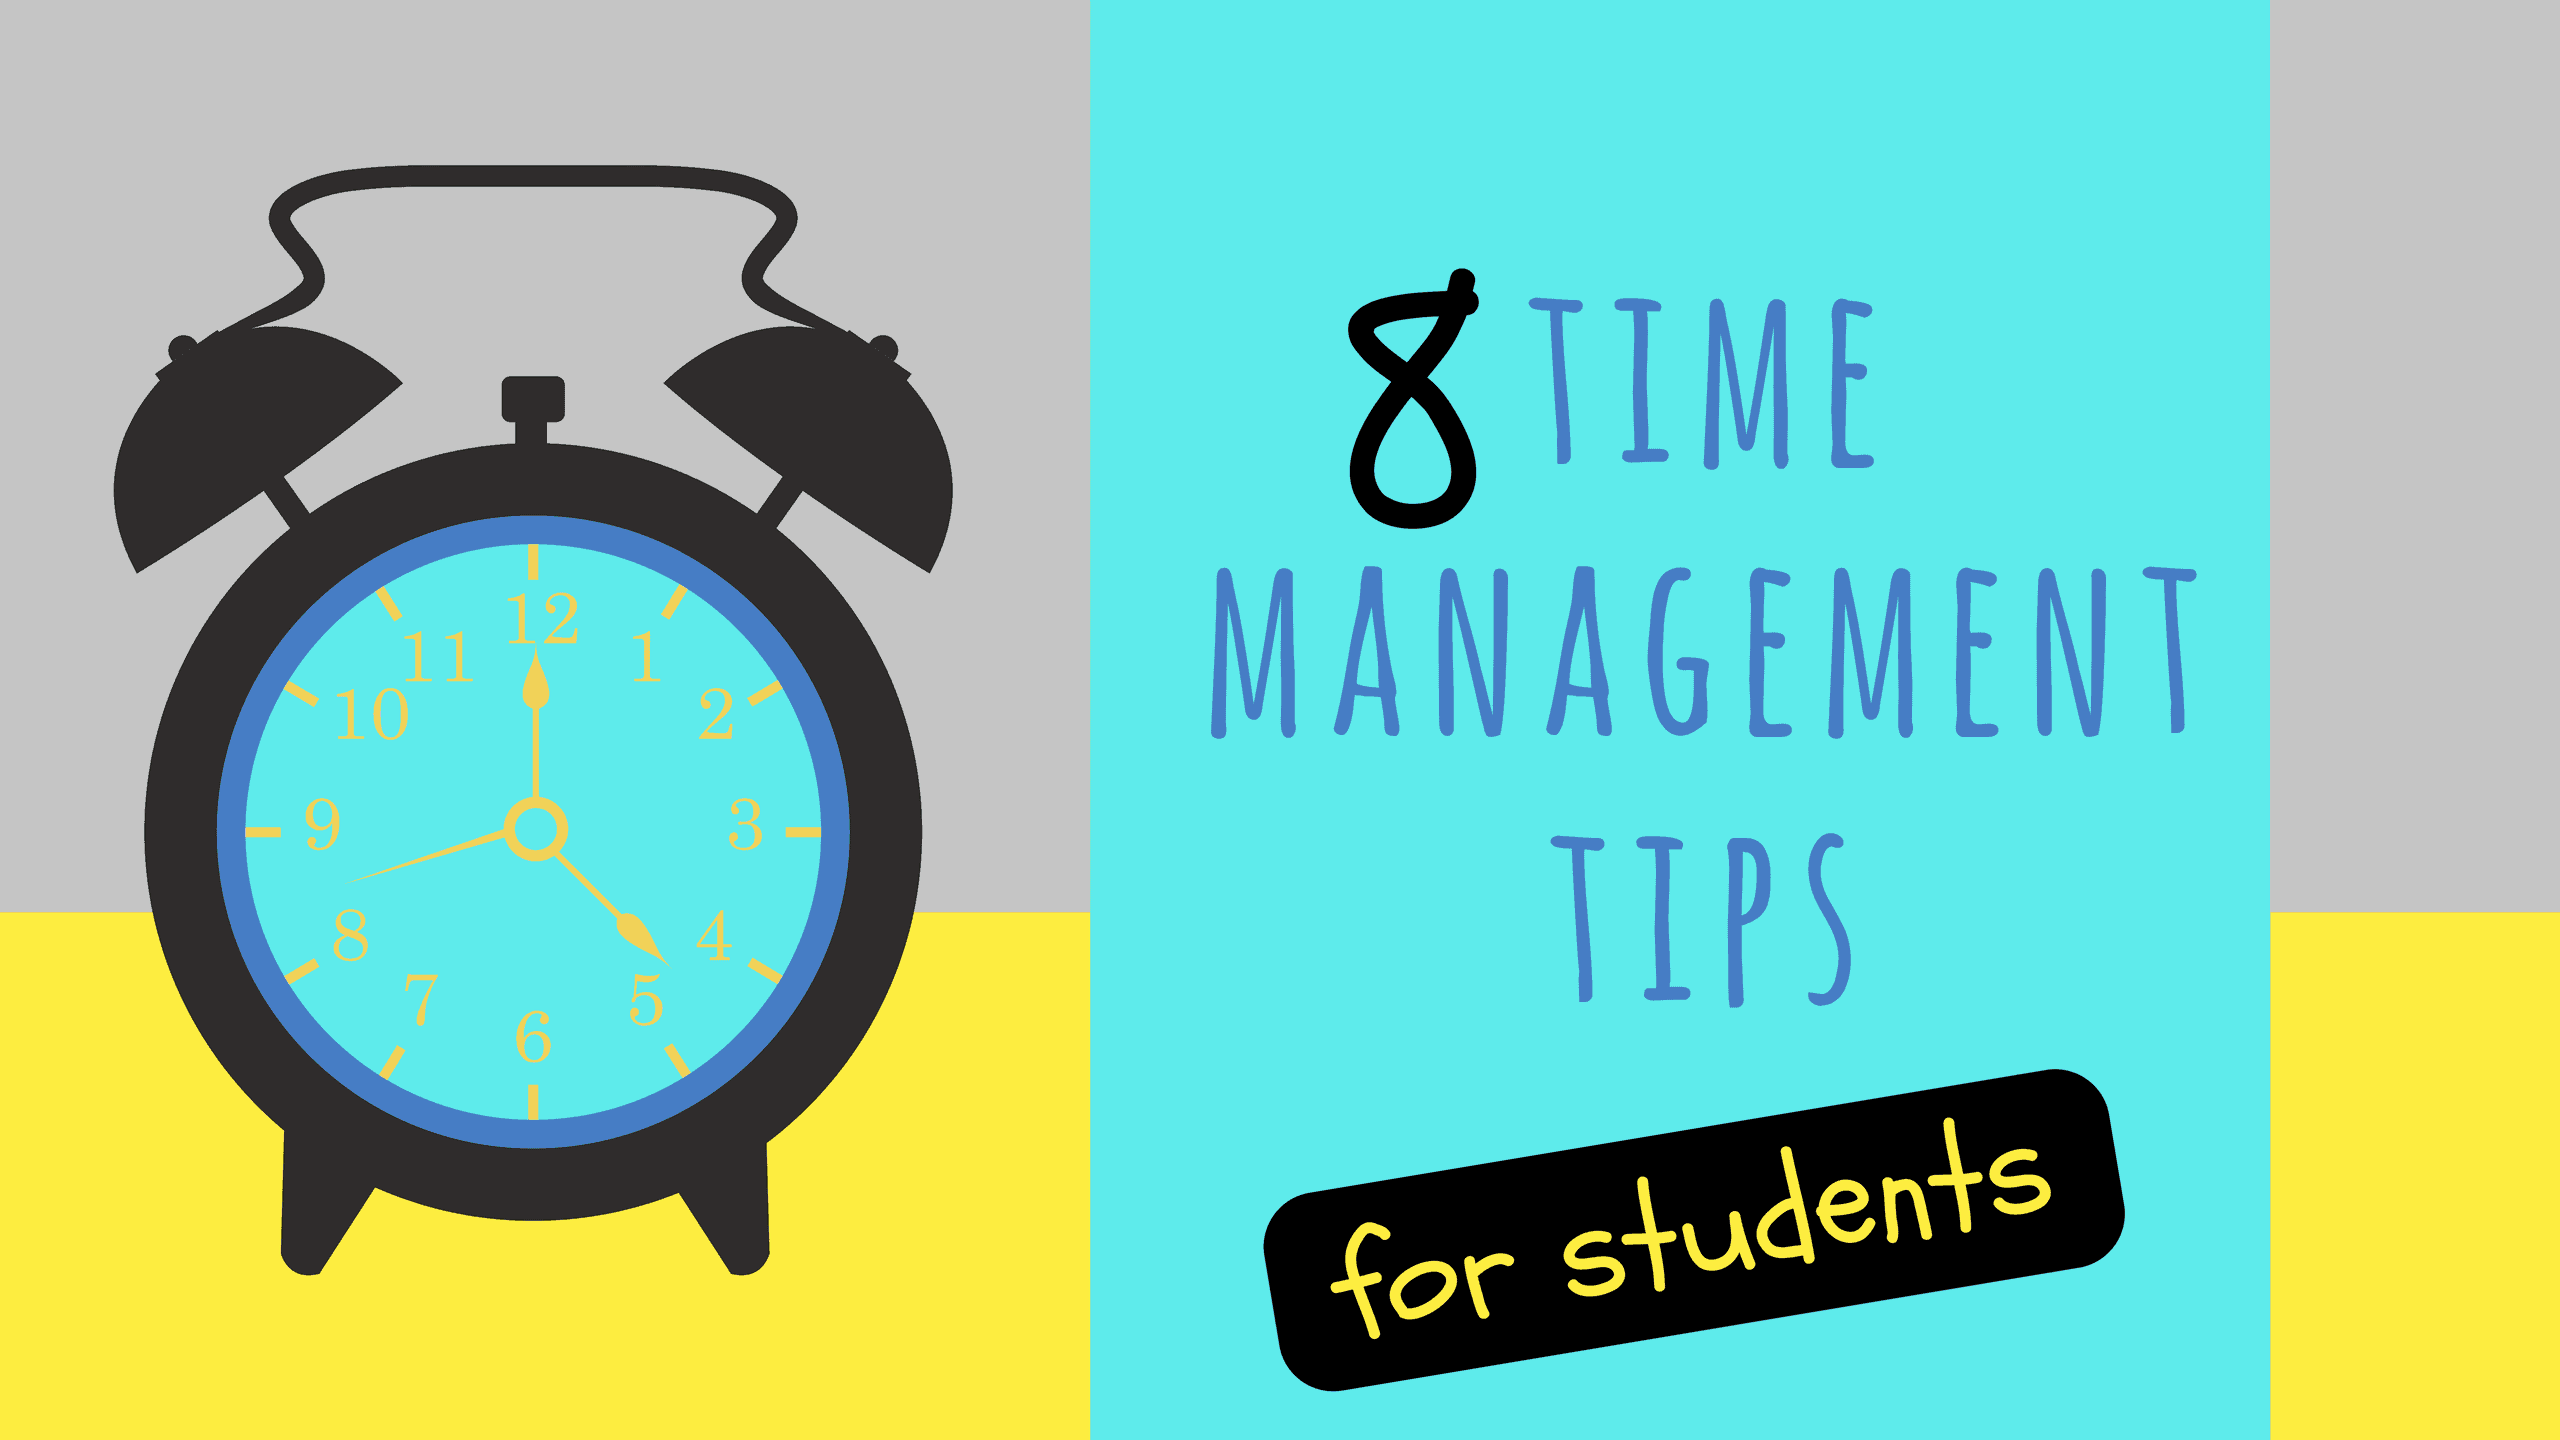 quantitative research about time management of students